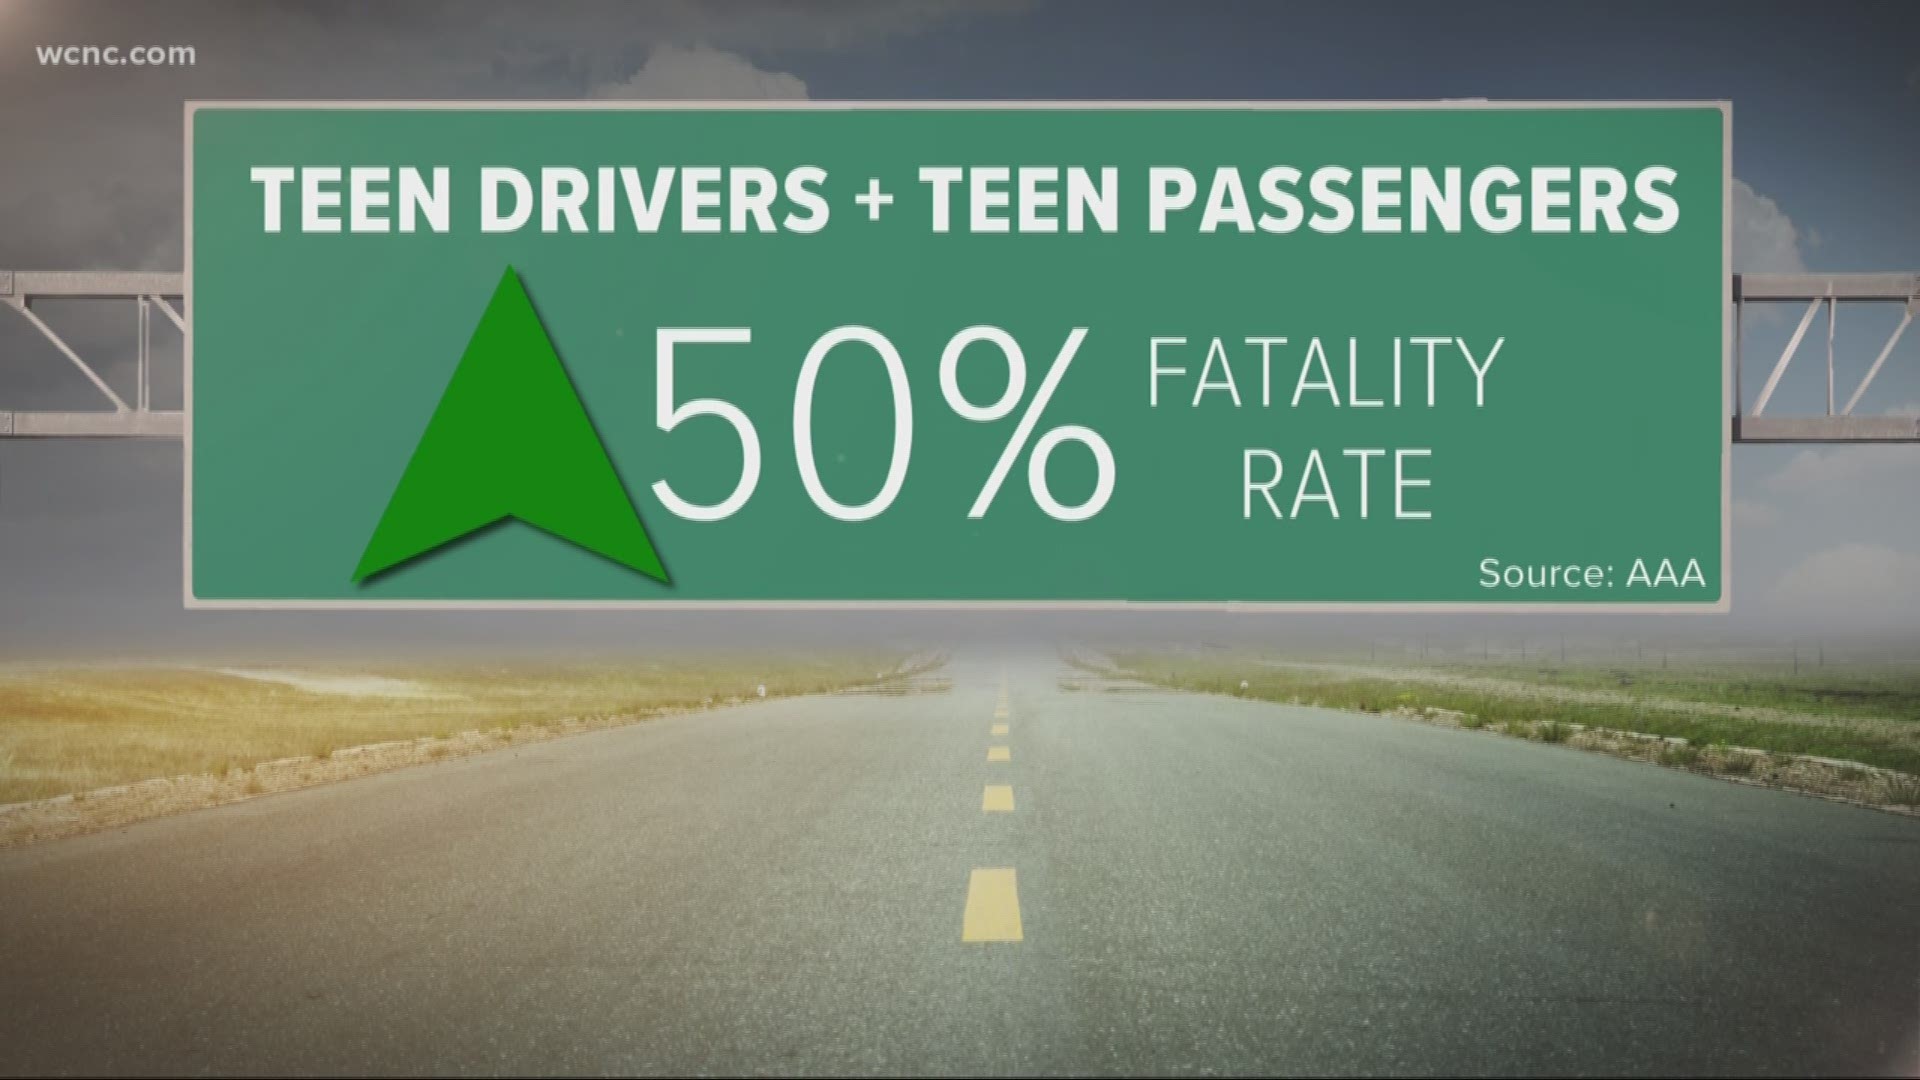 We just got our hands on some startling new research that shows teen drivers and other teen passengers can be a deadly combination.